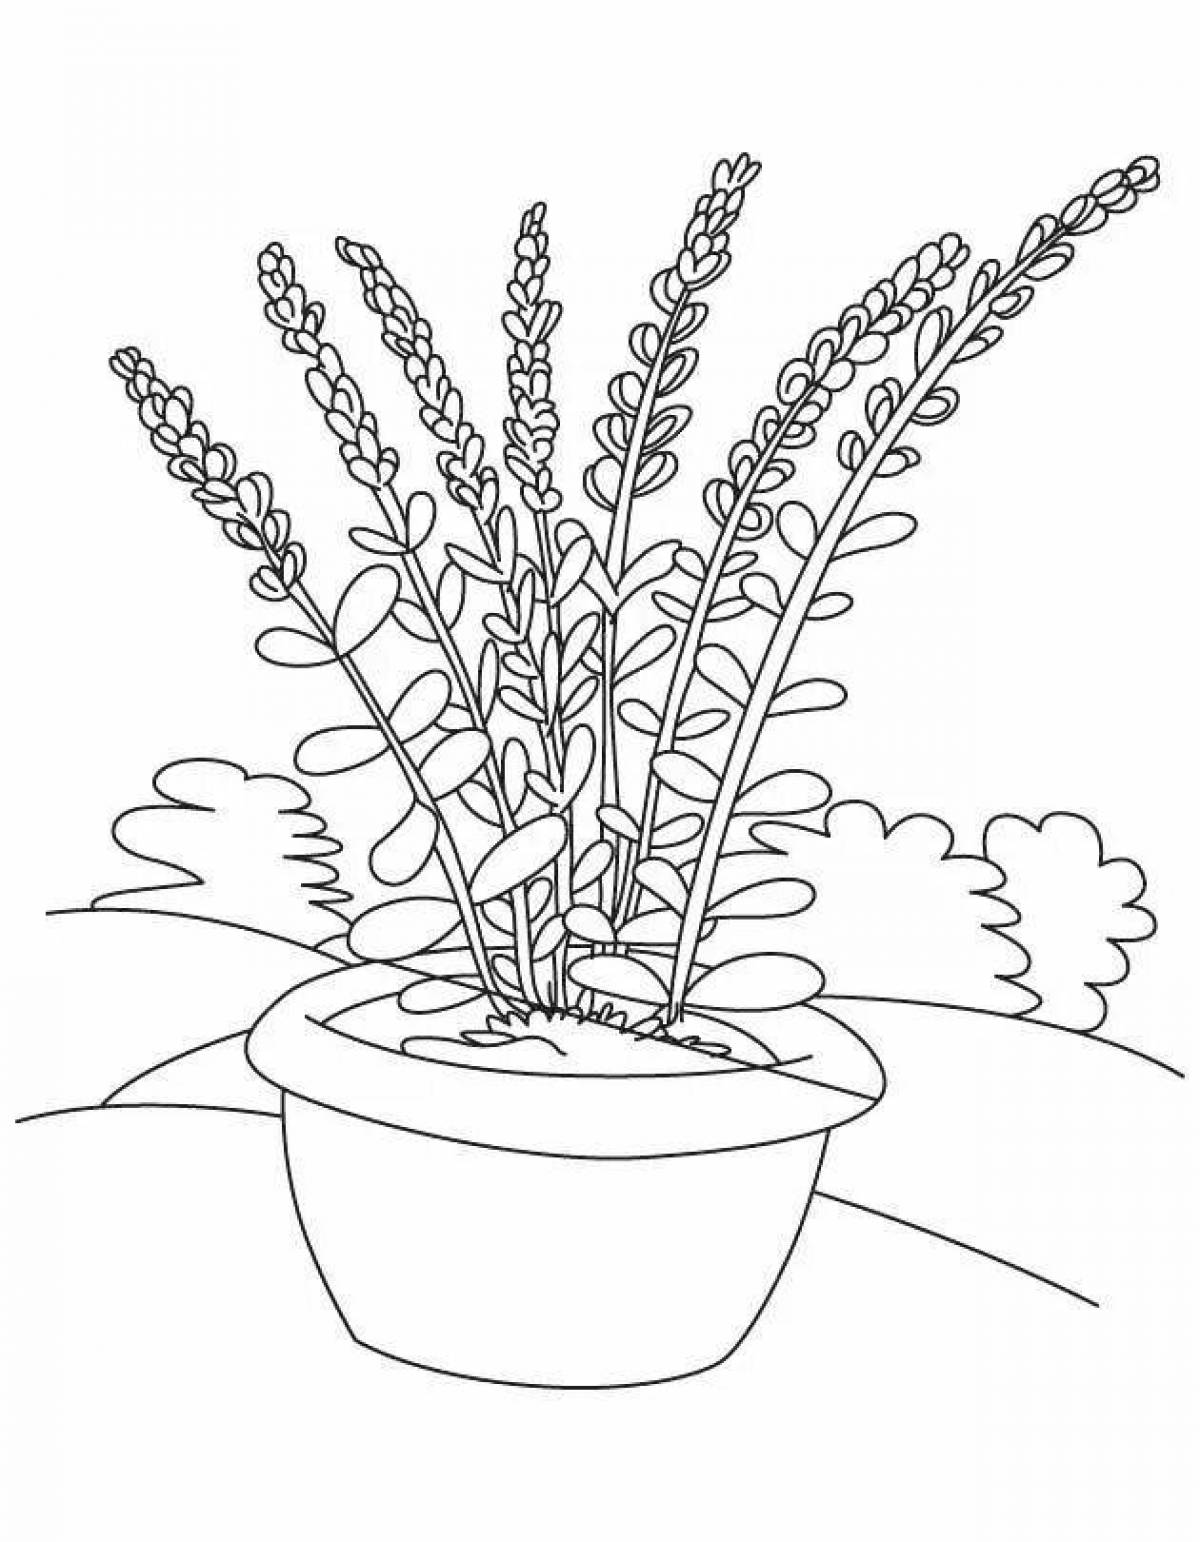 Amazing lavender coloring page